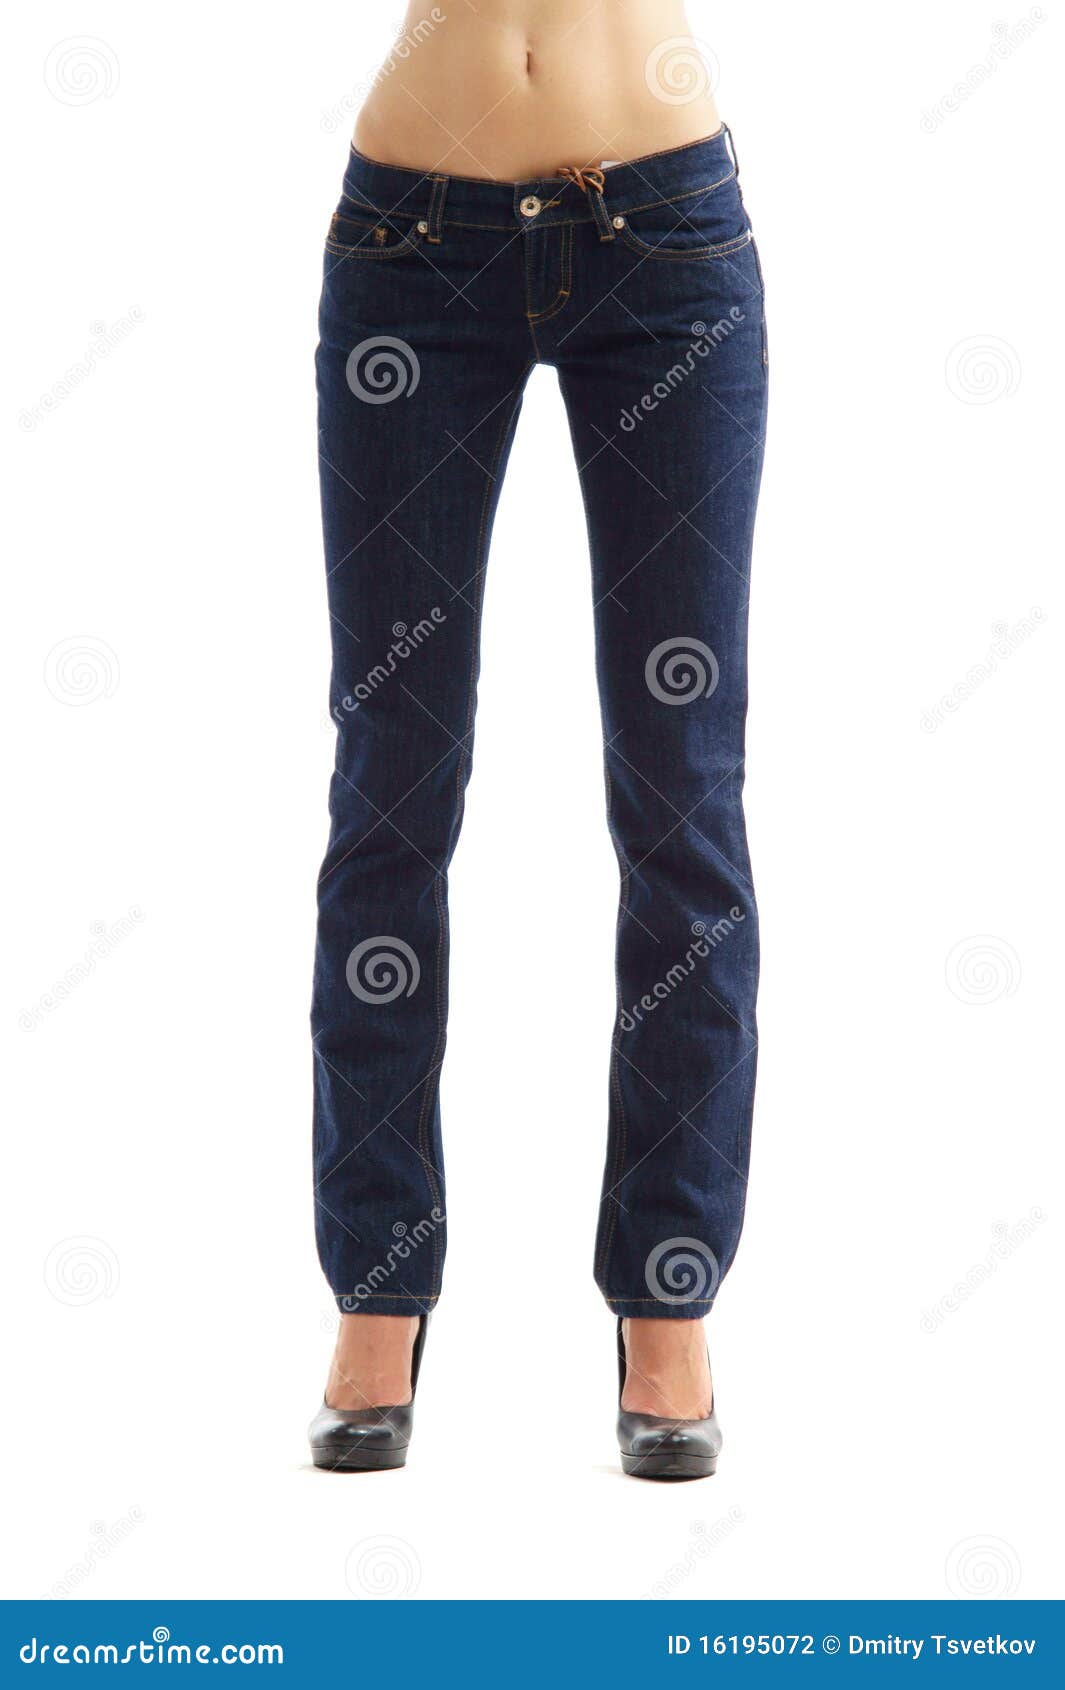 Female legs in blue jeans stock photo. Image of model - 16195072